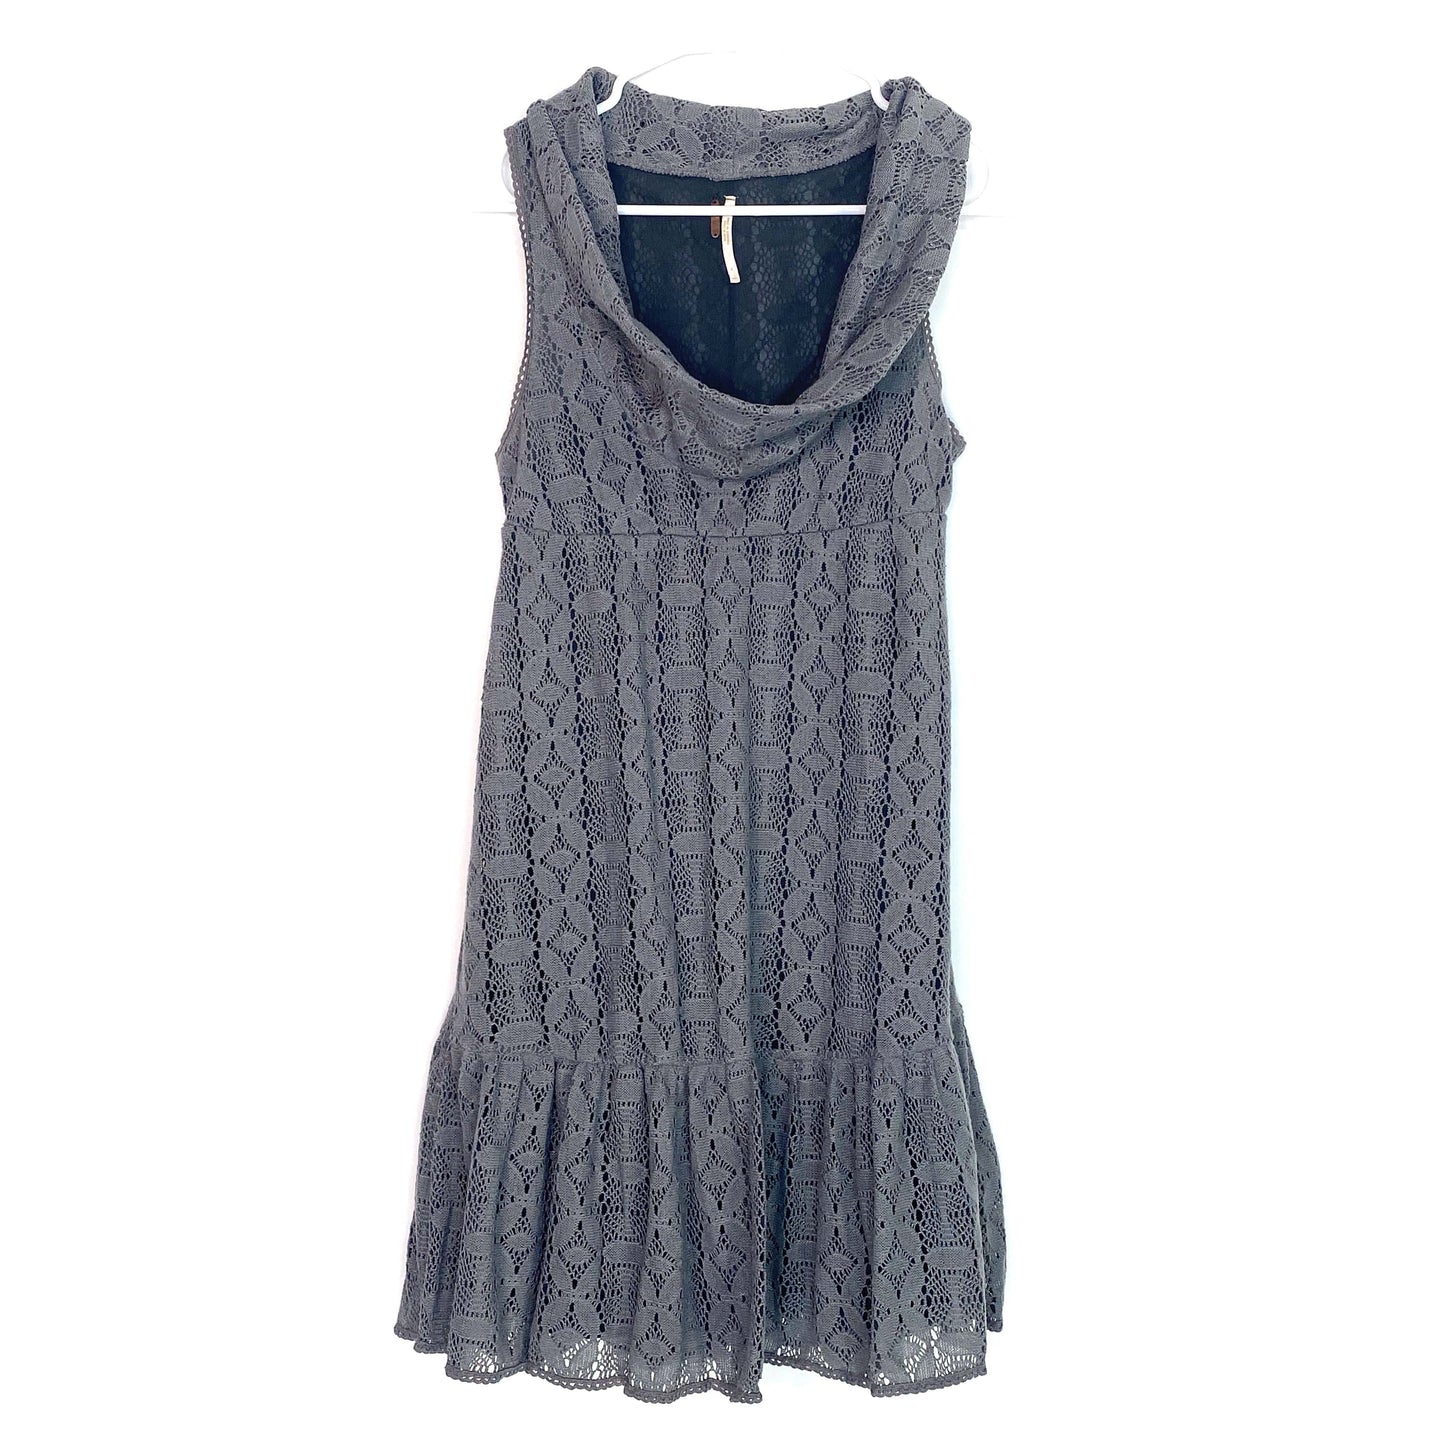 Free People Womens Size 4 Gray Dress Crochet Knit Fully Lined Cowl Neck